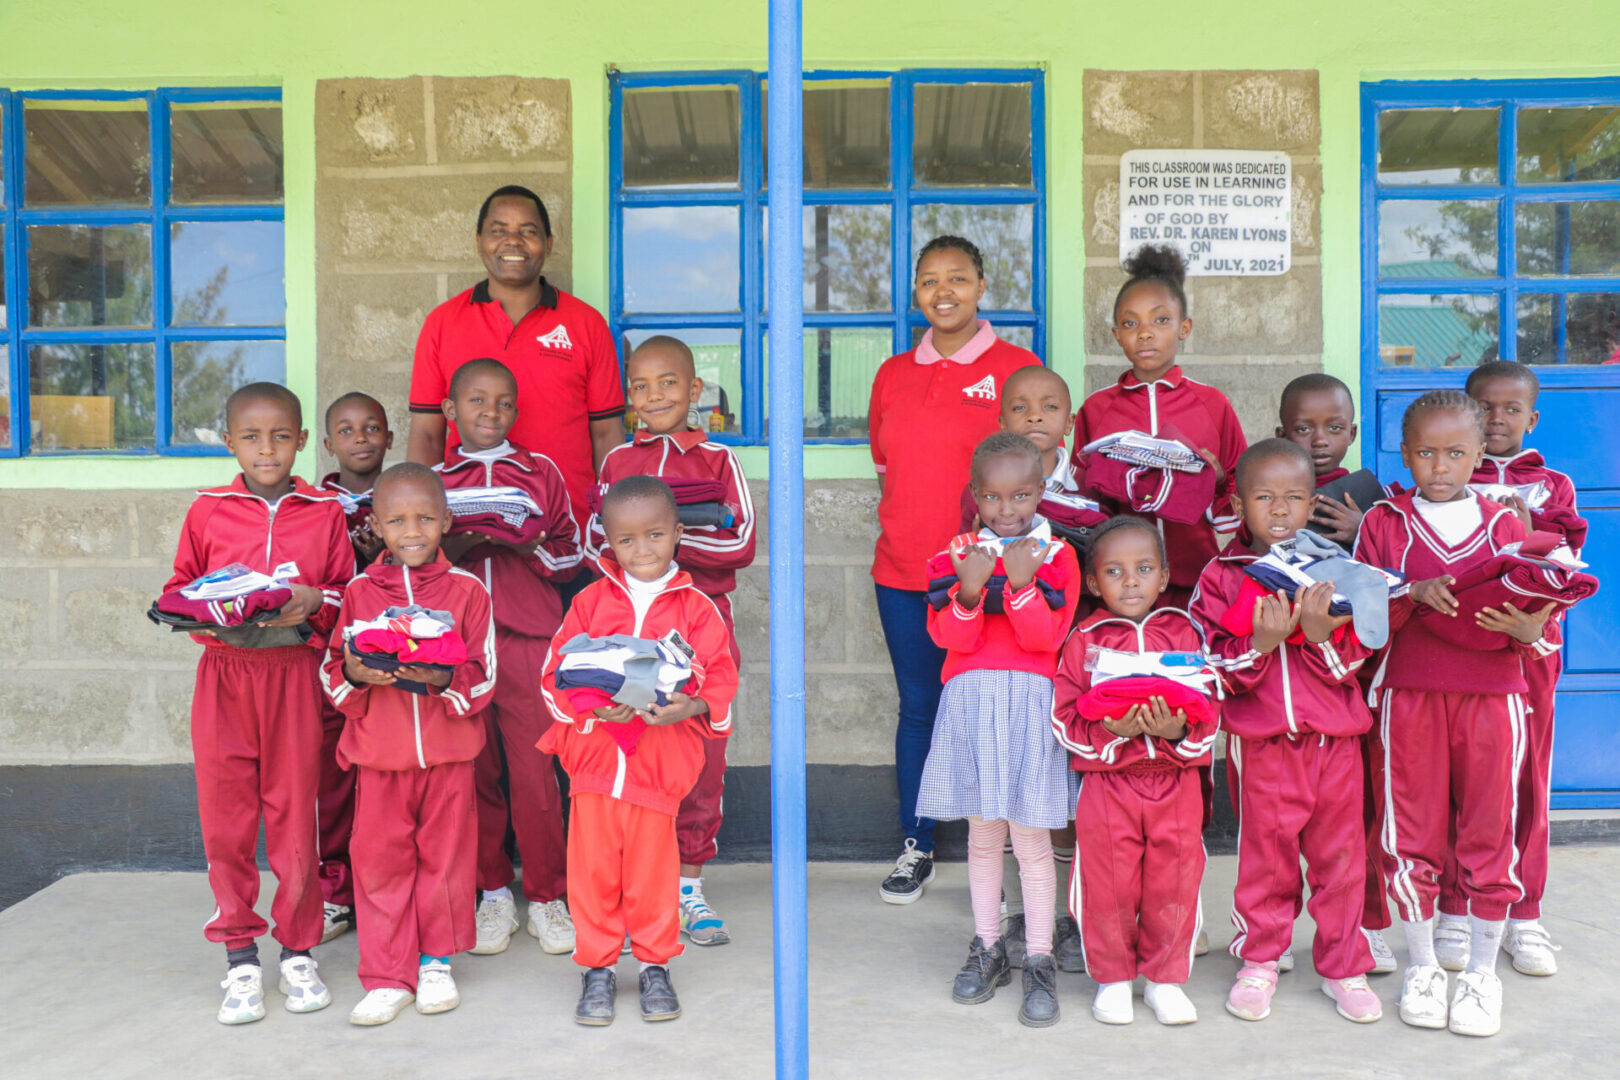 A group of children in red shirts holding books.